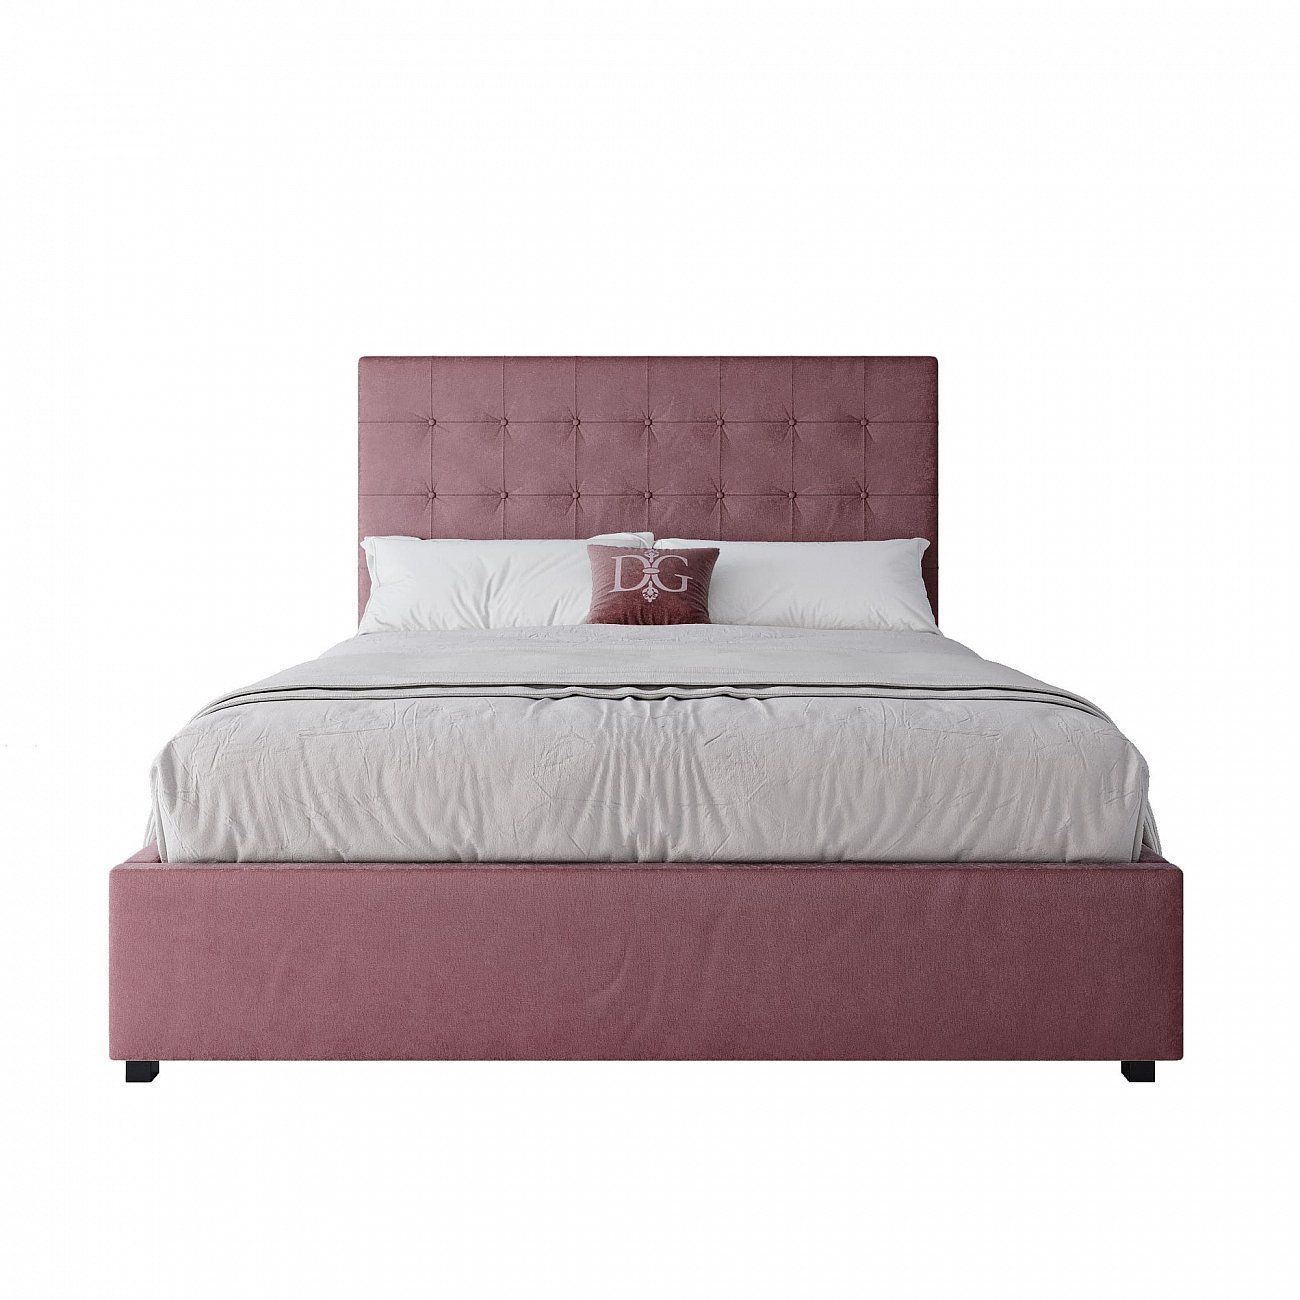 Double bed 160x200 cm Dusty Rose Royal Black